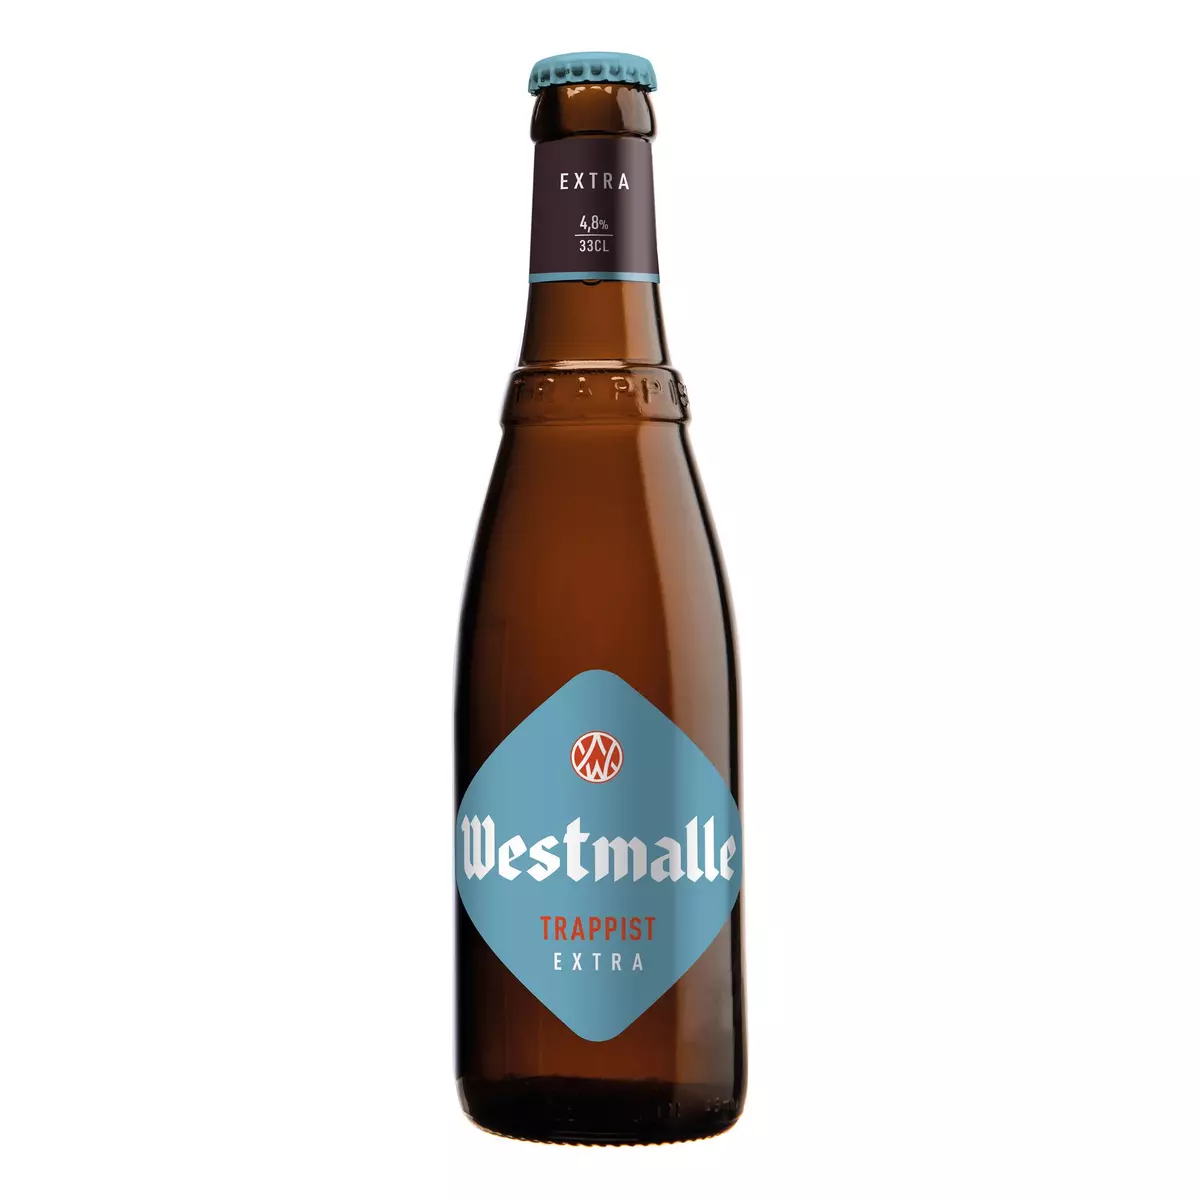 WESTMALLE Trappist extra Bière blonde 9.5% 33cl